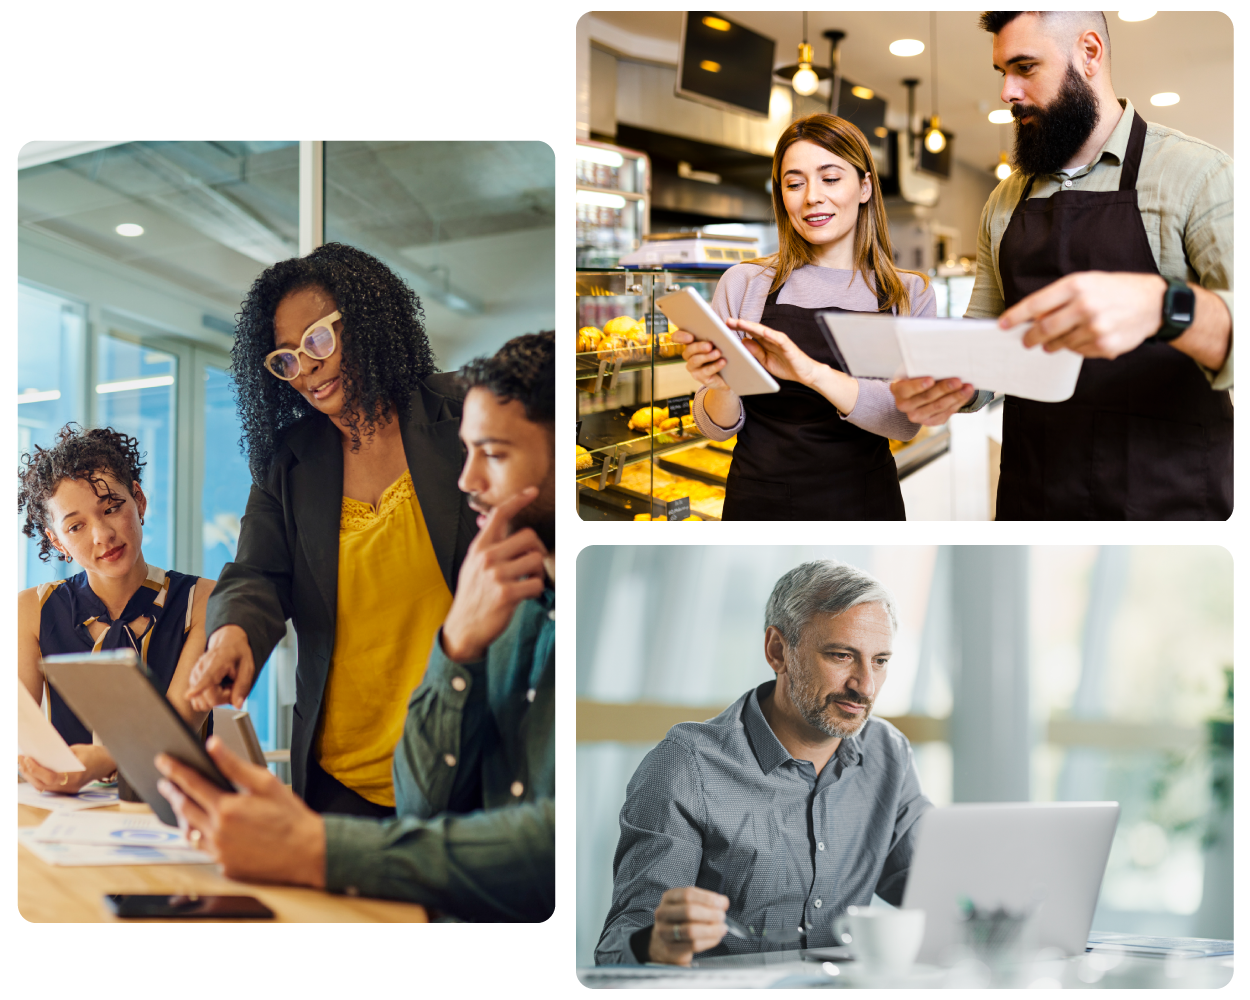 A grid of three images depicting various kinds of small business